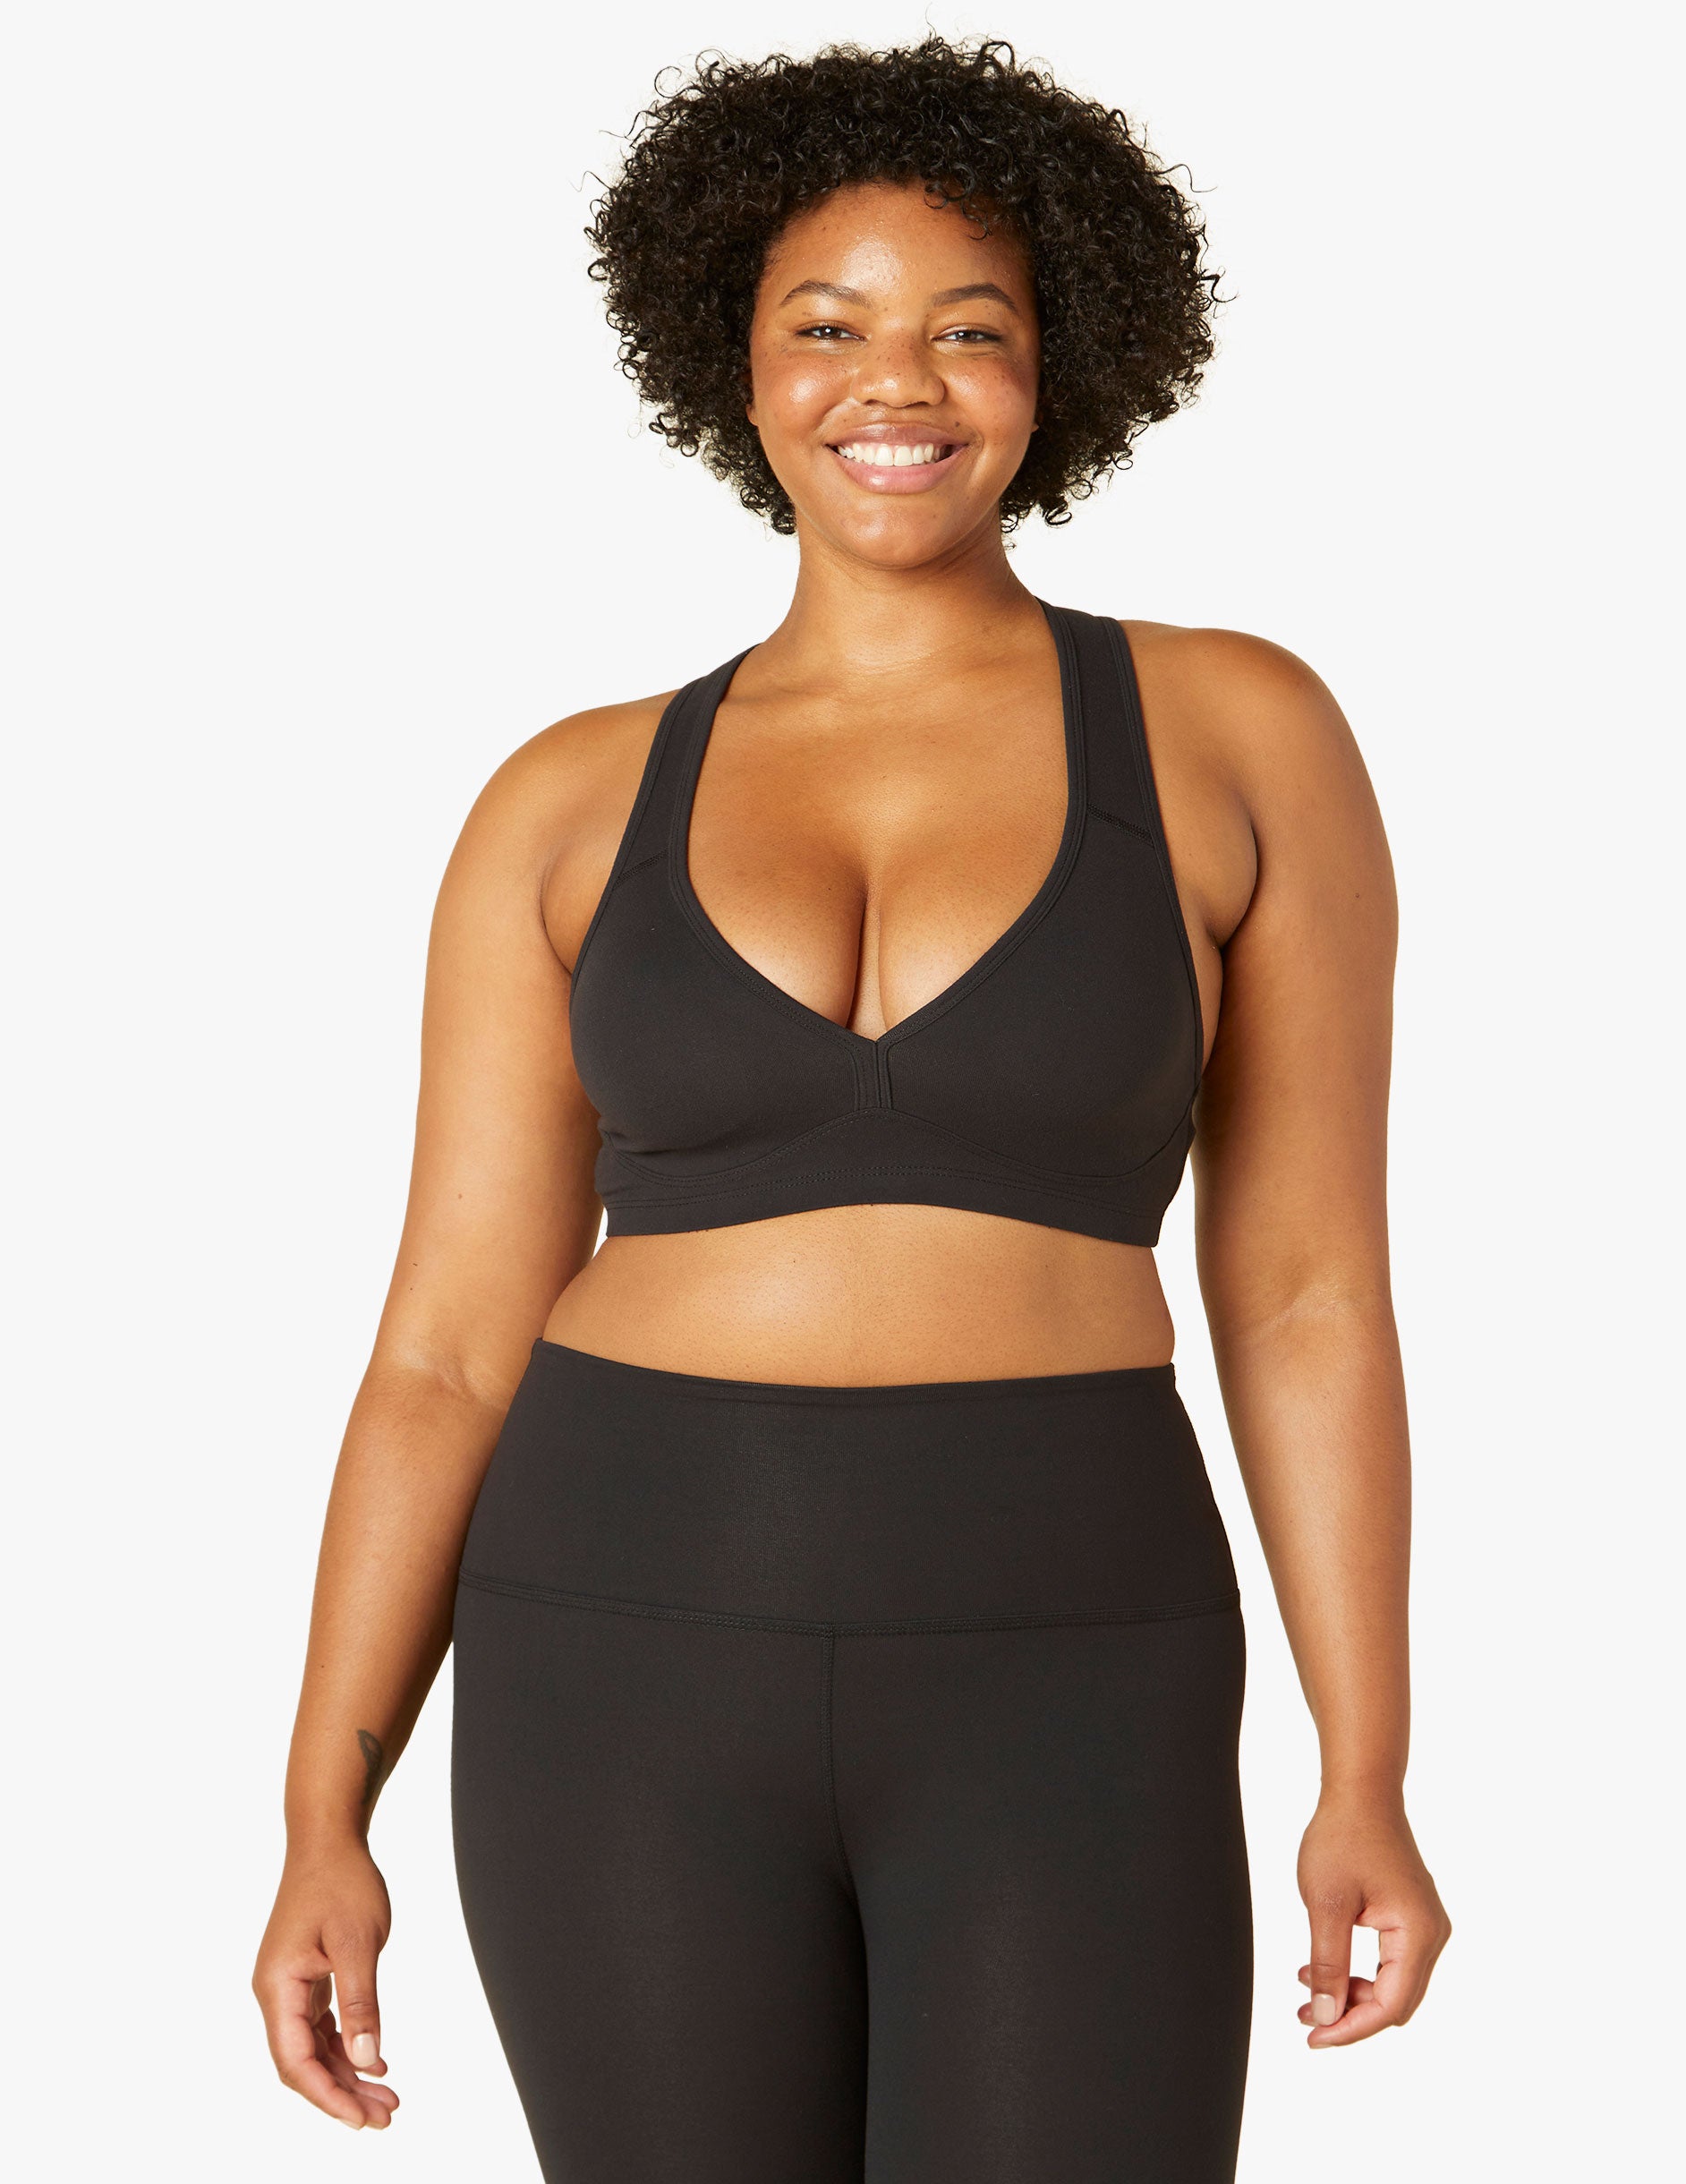 Women's Sports Bras - Sale Up to 90% Off